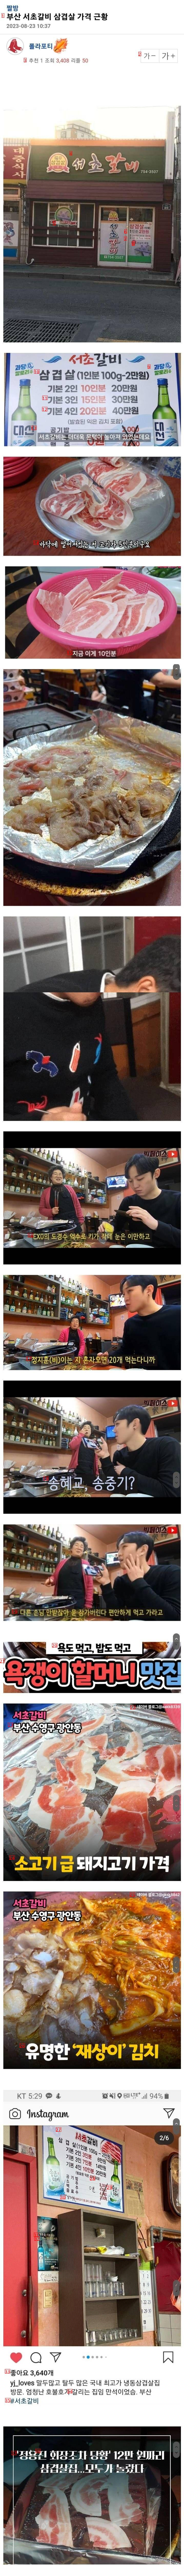 How is the price of Seocho Galbi in Busan